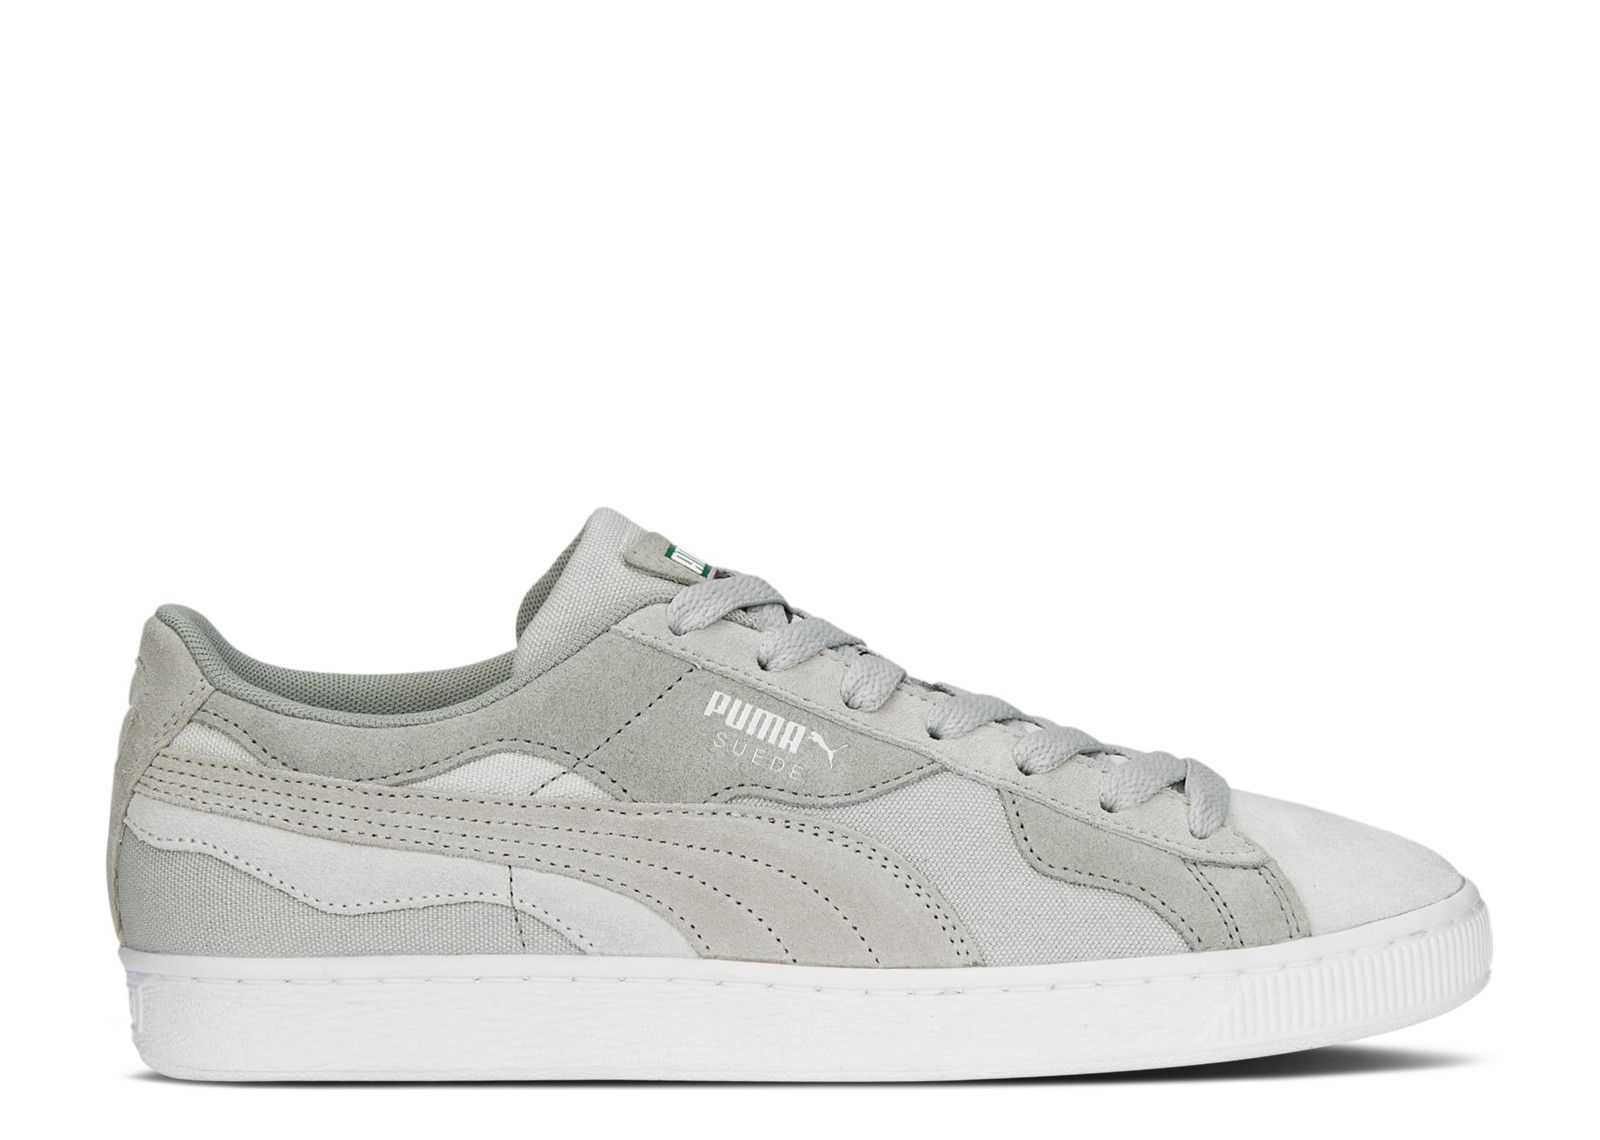 Suede 'Camowave Earth Feather Grey' - Puma - 390673 02 - feather grey ...